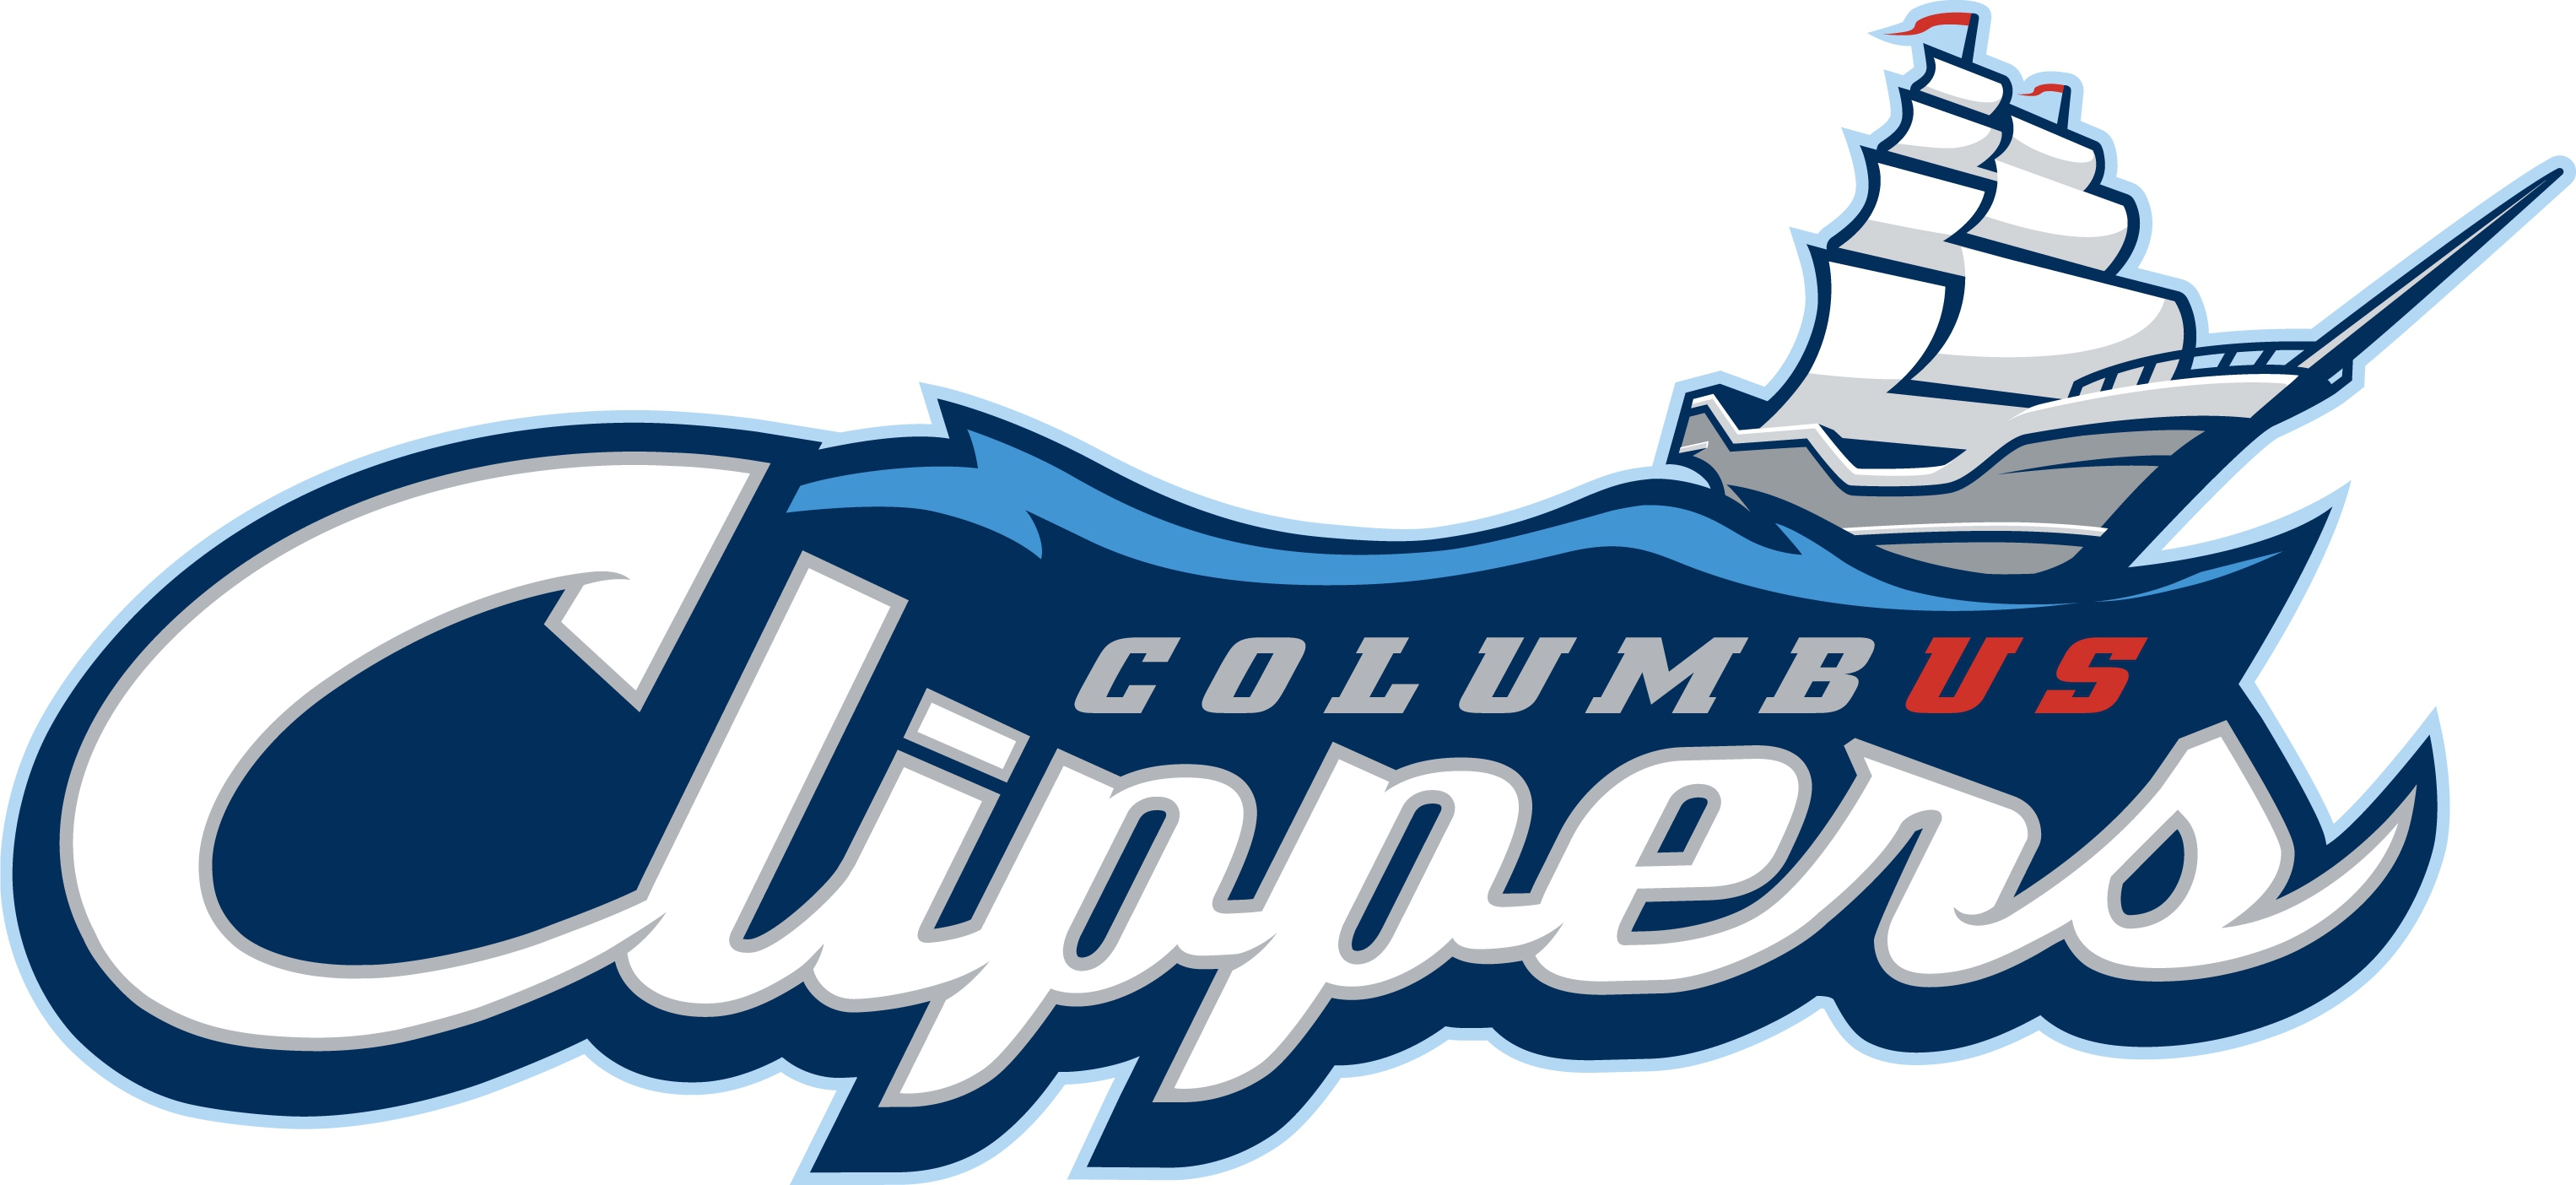 Columbus Clippers Wallpapers Images Photos Pictures Backgrounds